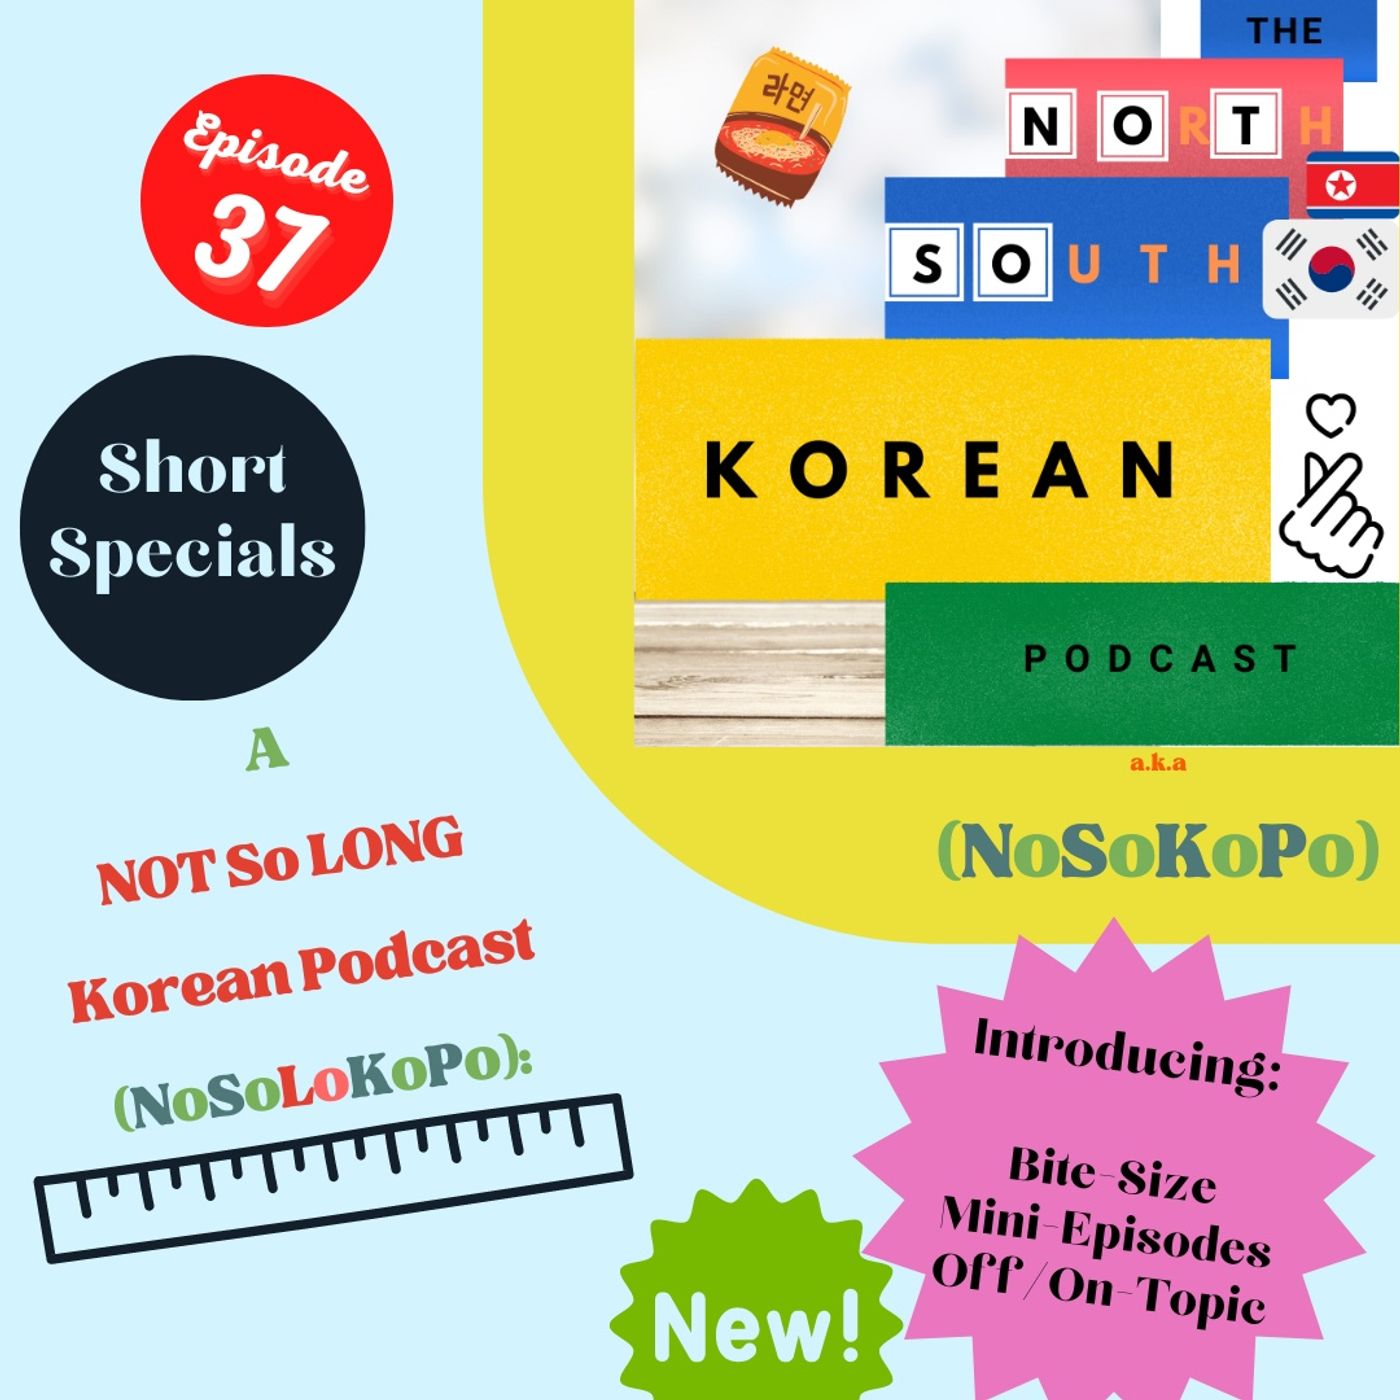 EPISODE 37: Introducing the 'NOT So LONG Korean Podcast' EPISODES